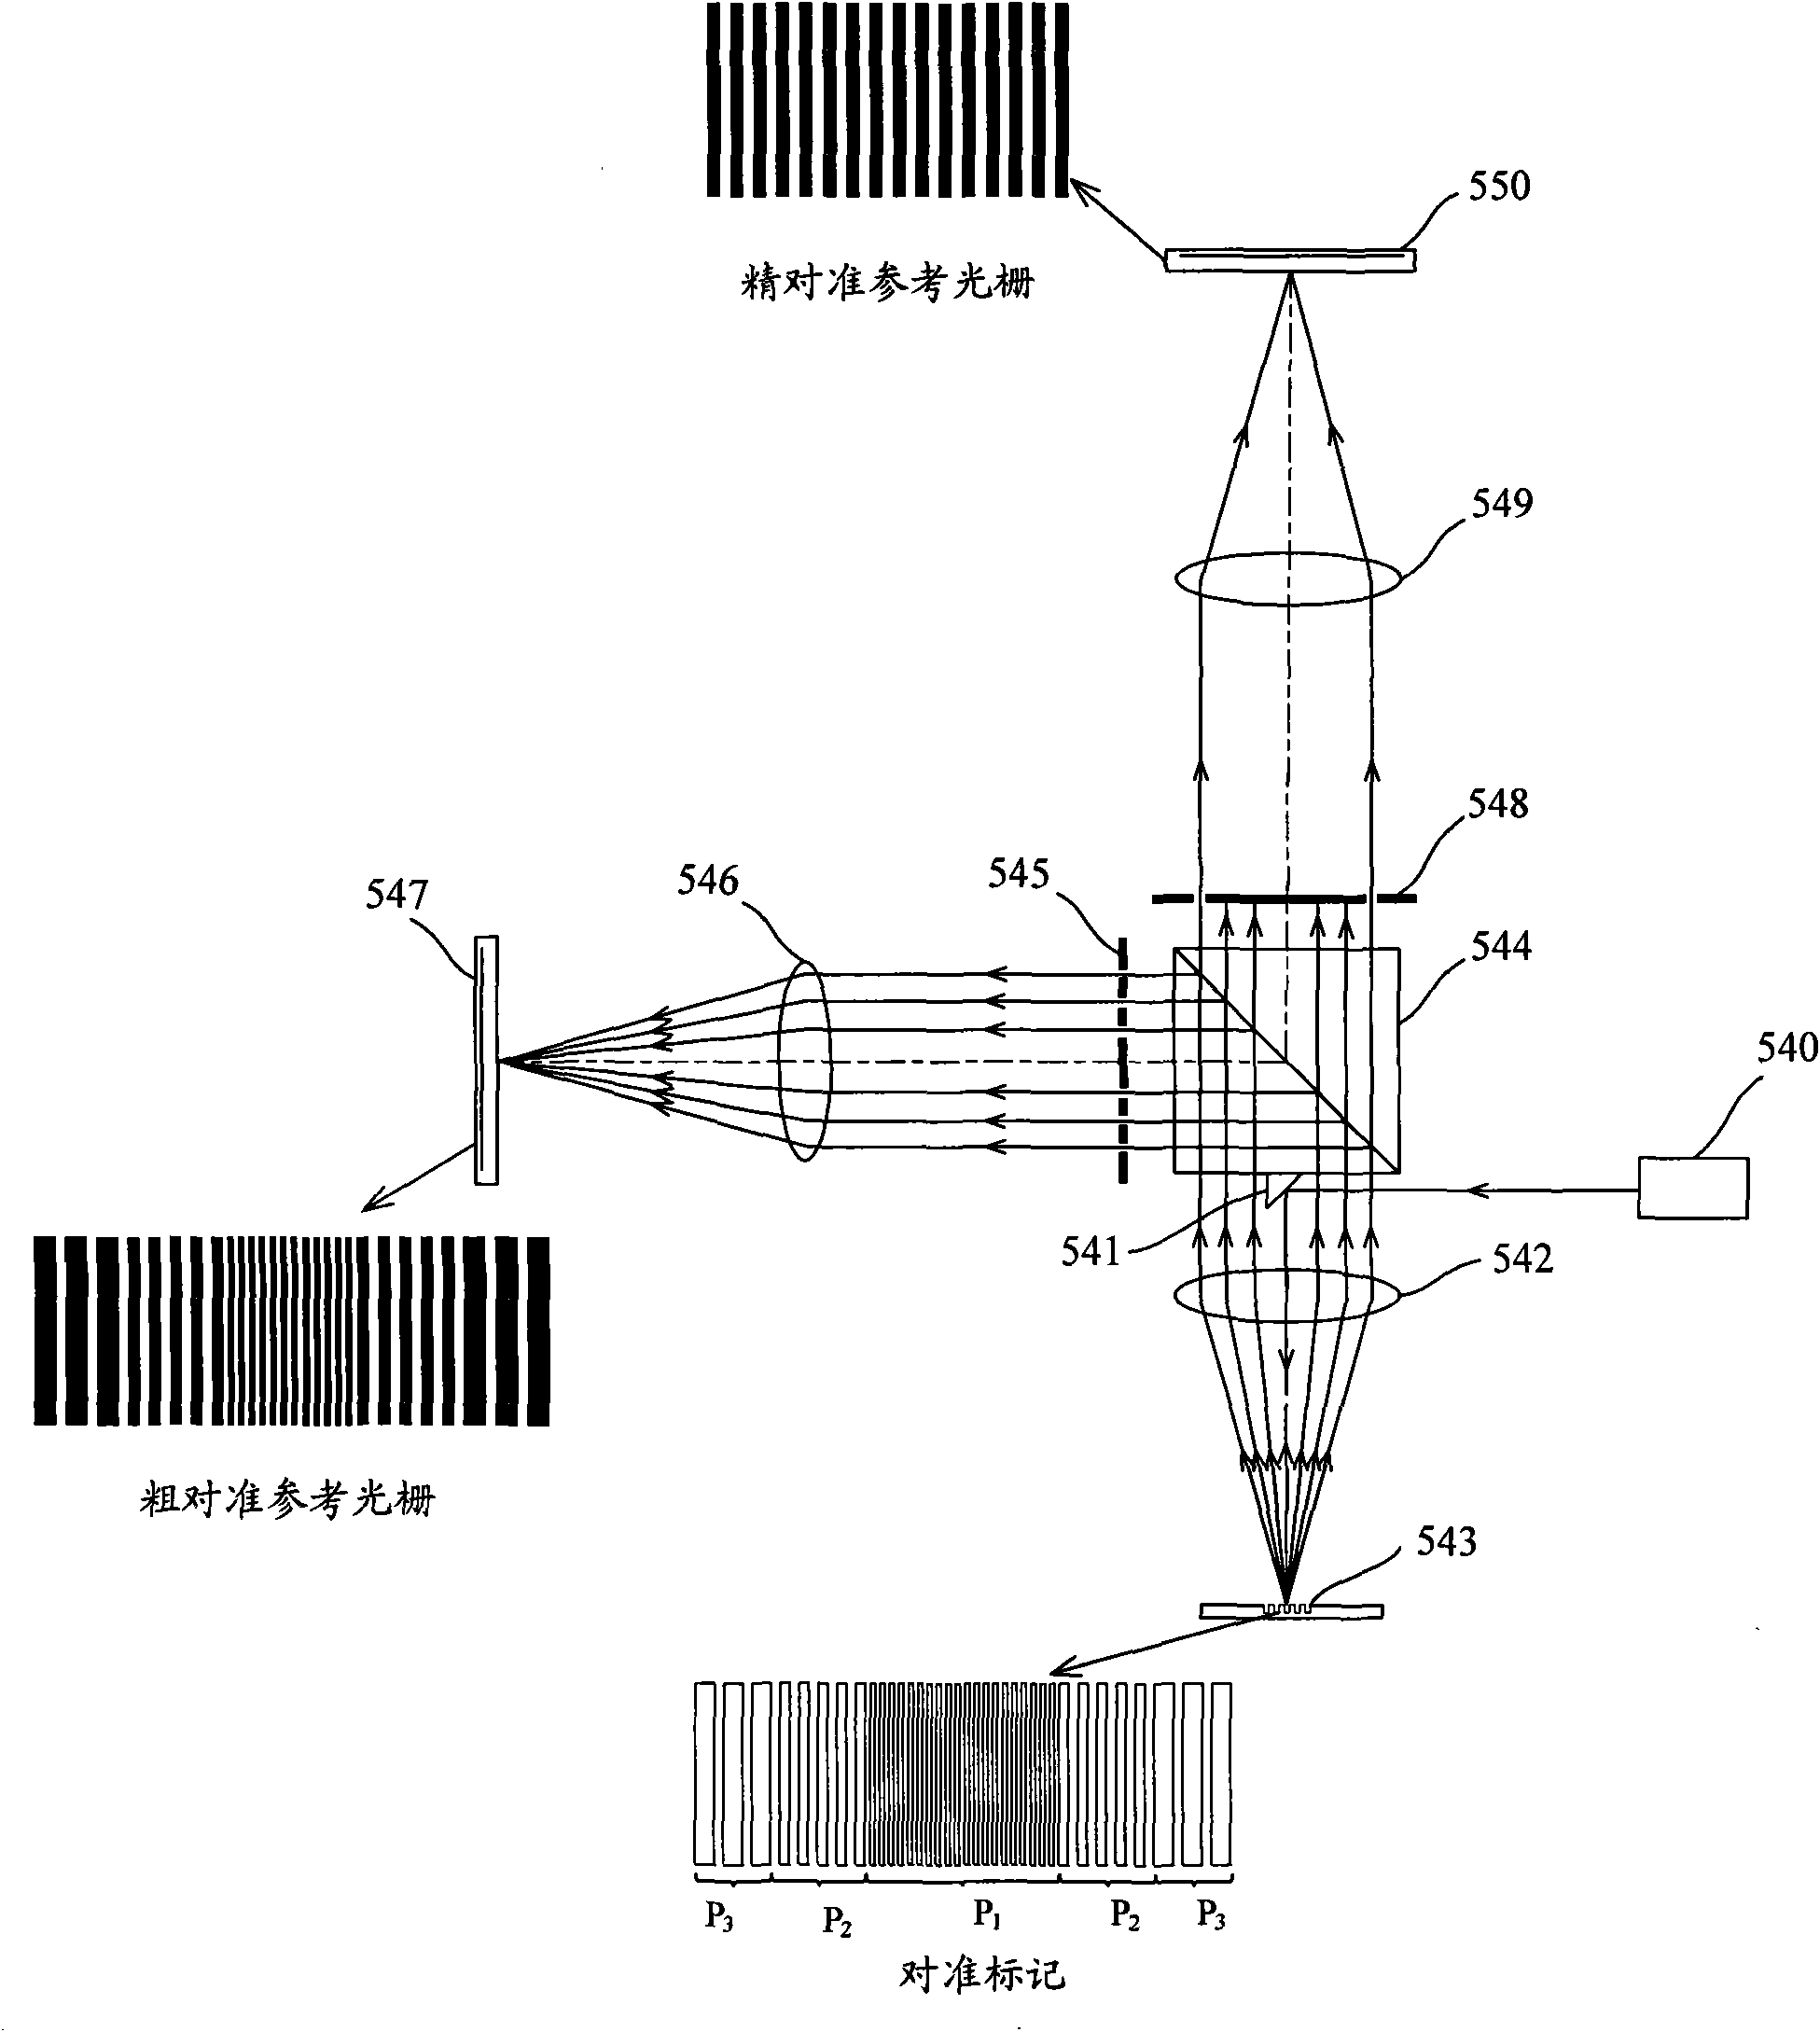 Alignment signal processing method in photoetching technology